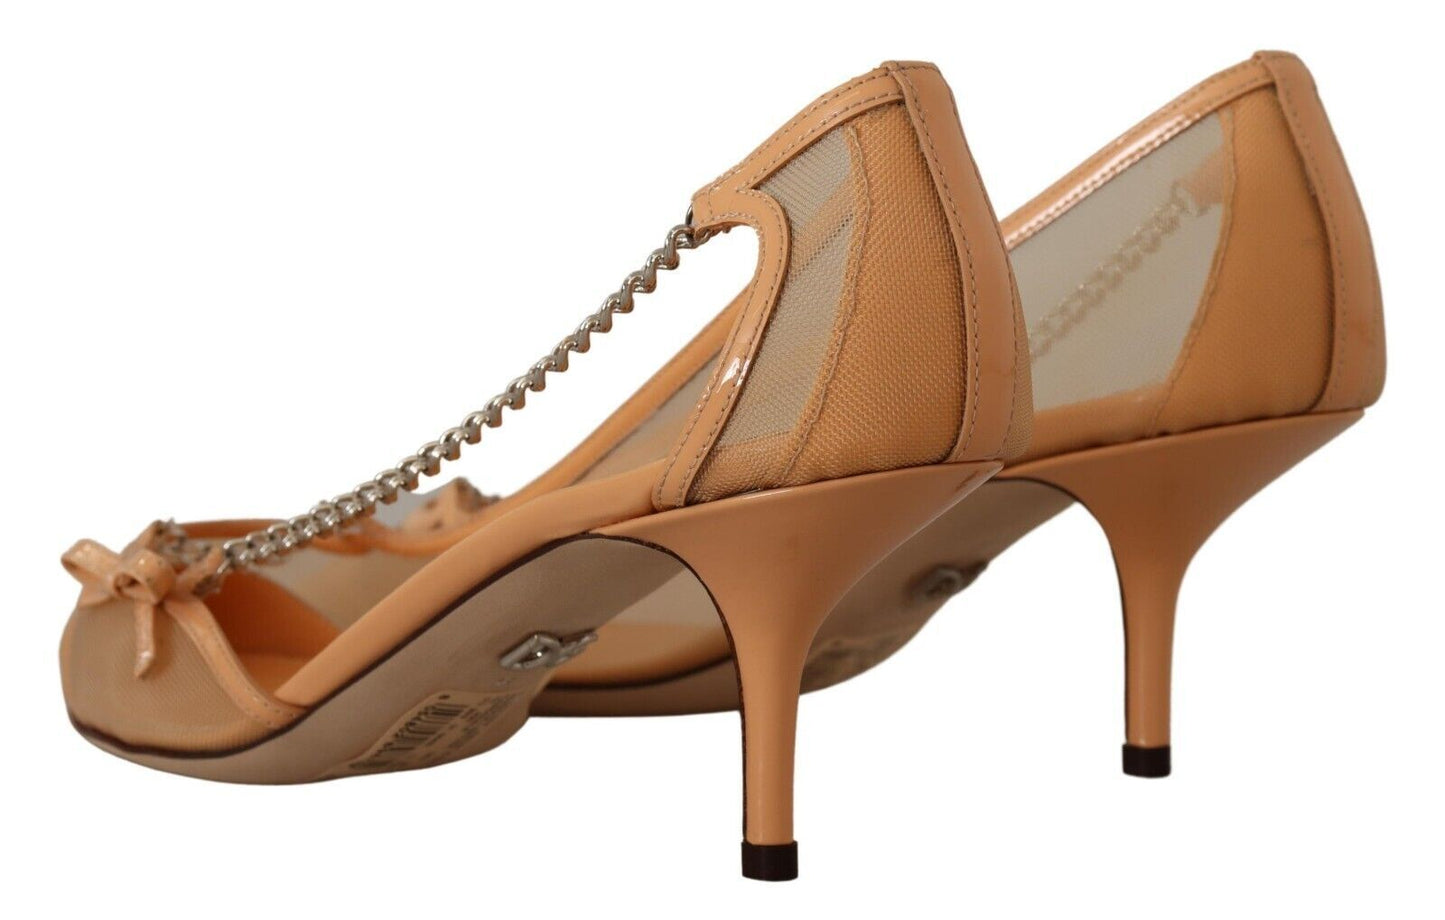 Elegant Beige Mesh Pumps with Silver Chains